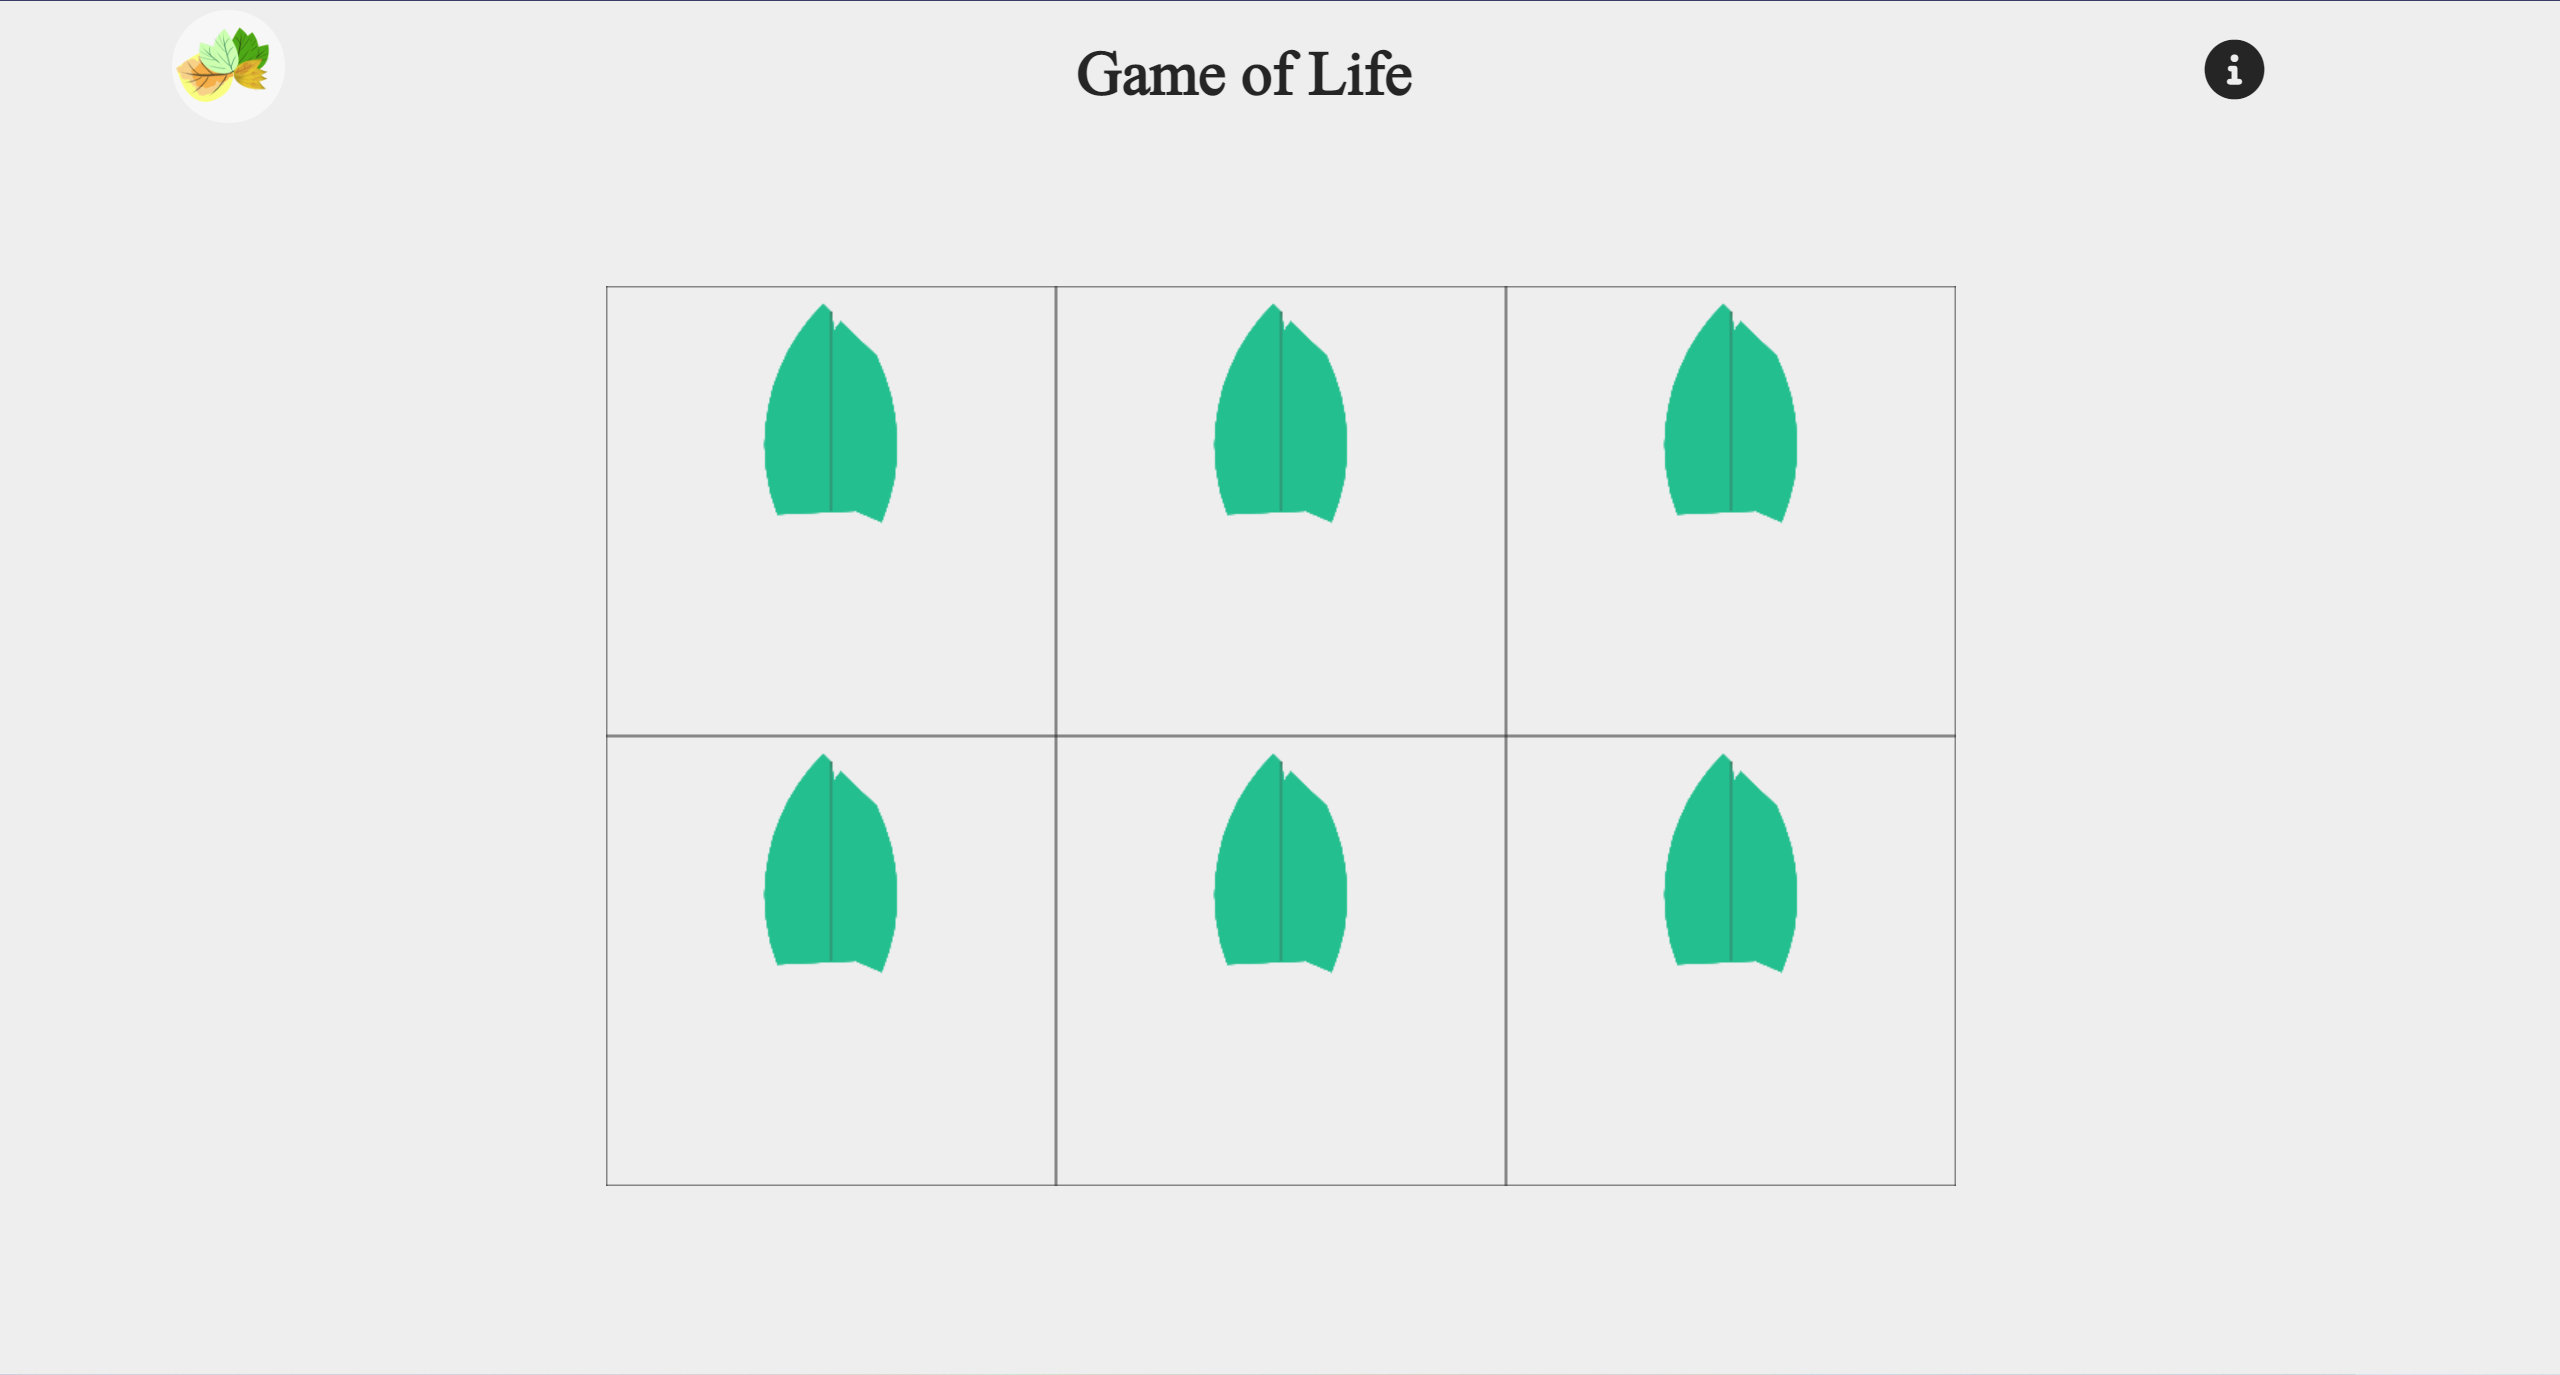 One leaf in game of life